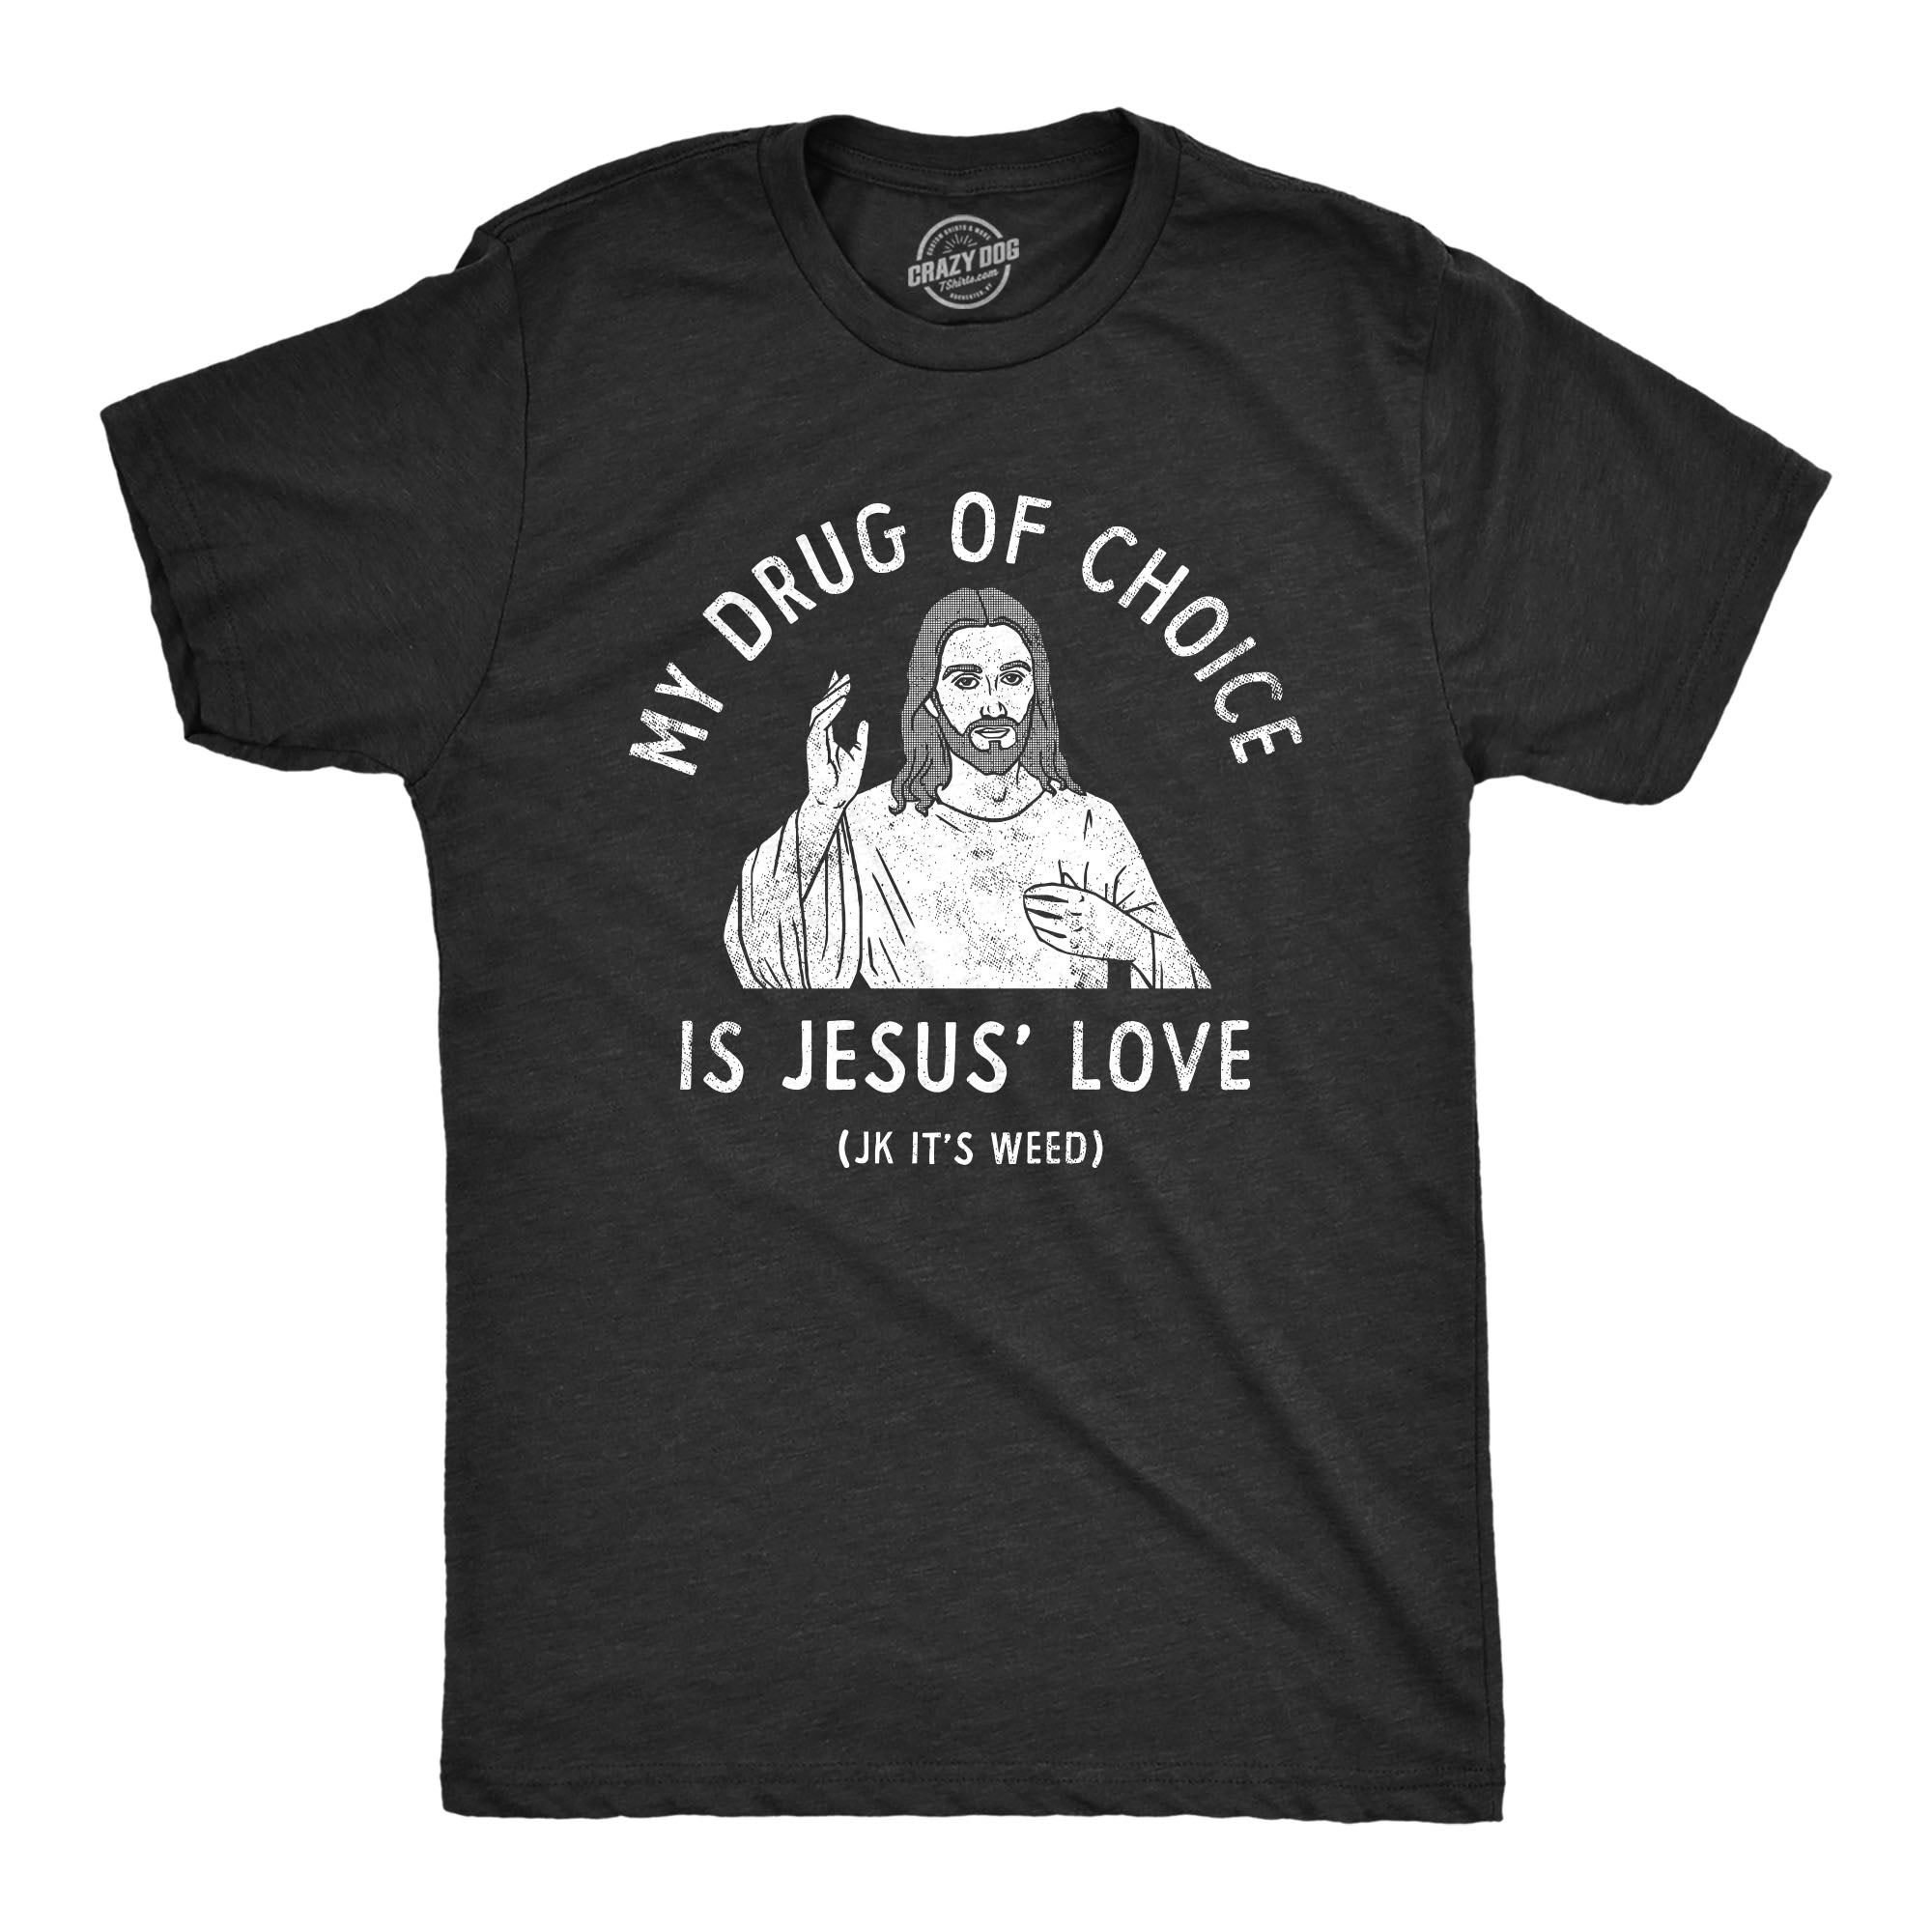 Funny Heather Black - LOVE My Drug Of Choice Is Jesus Love JK Its Weed Mens T Shirt Nerdy 420 Religion sarcastic Tee